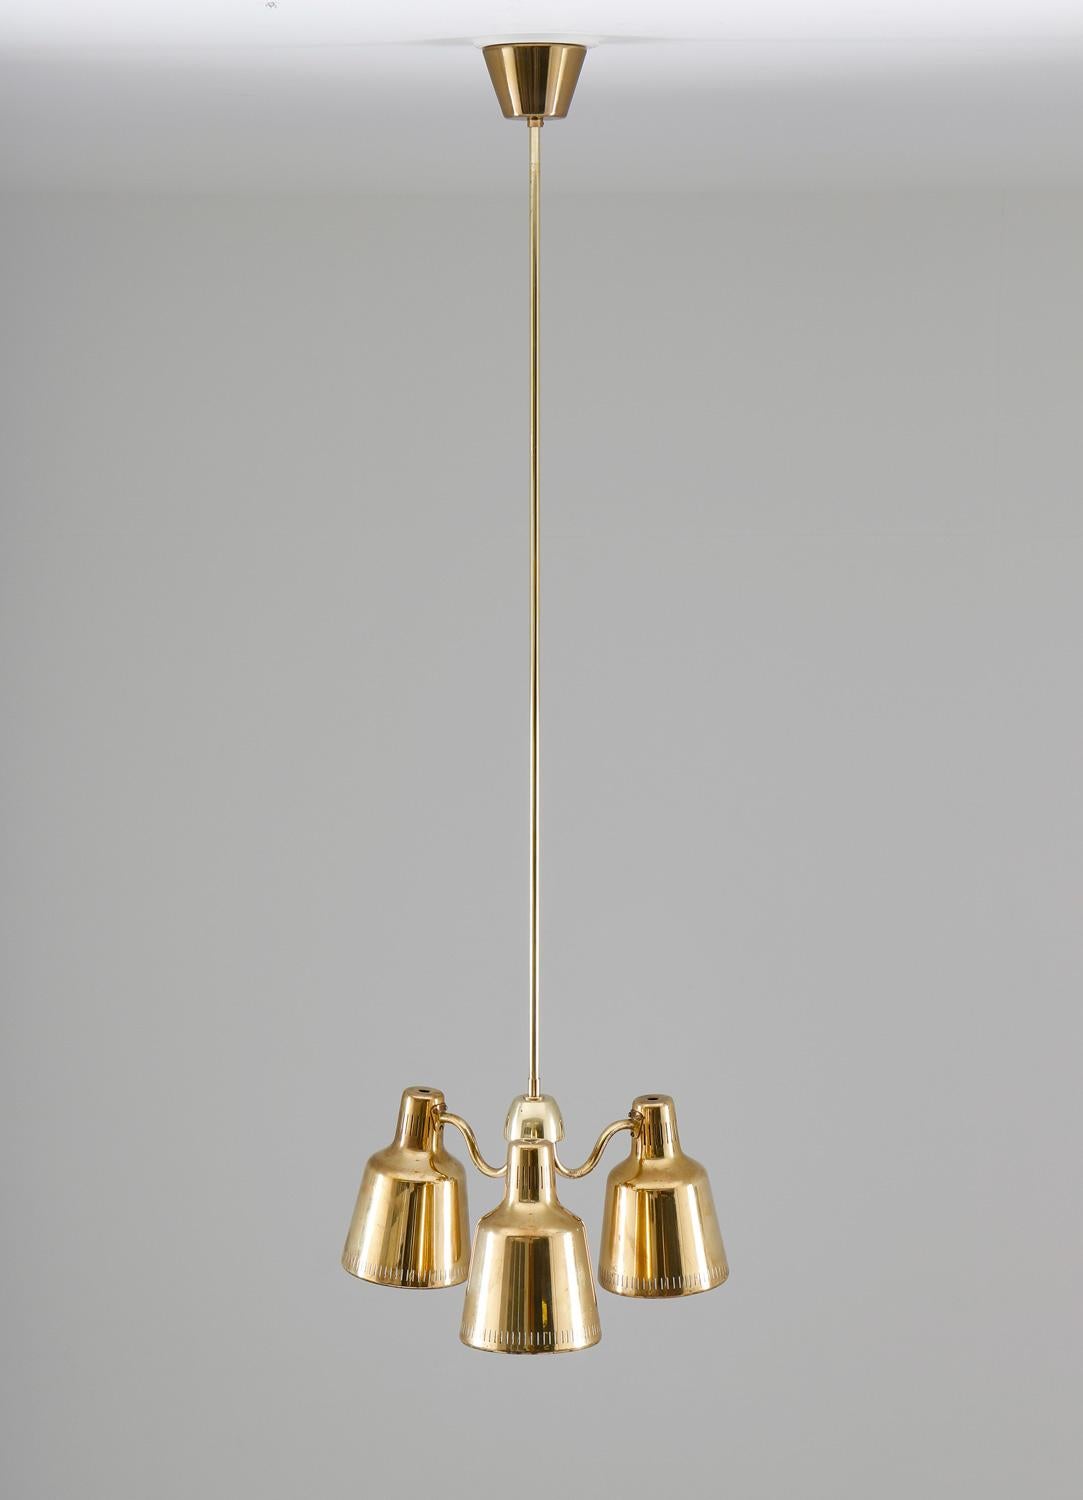 Rare Swedish modern pendant, possibly designed by Hans Bergström.
This pendand features three light sources, hidden by beautiful perforated brass shades. The shades are connected to a center piece, where the brass rod, holding the lamp, is